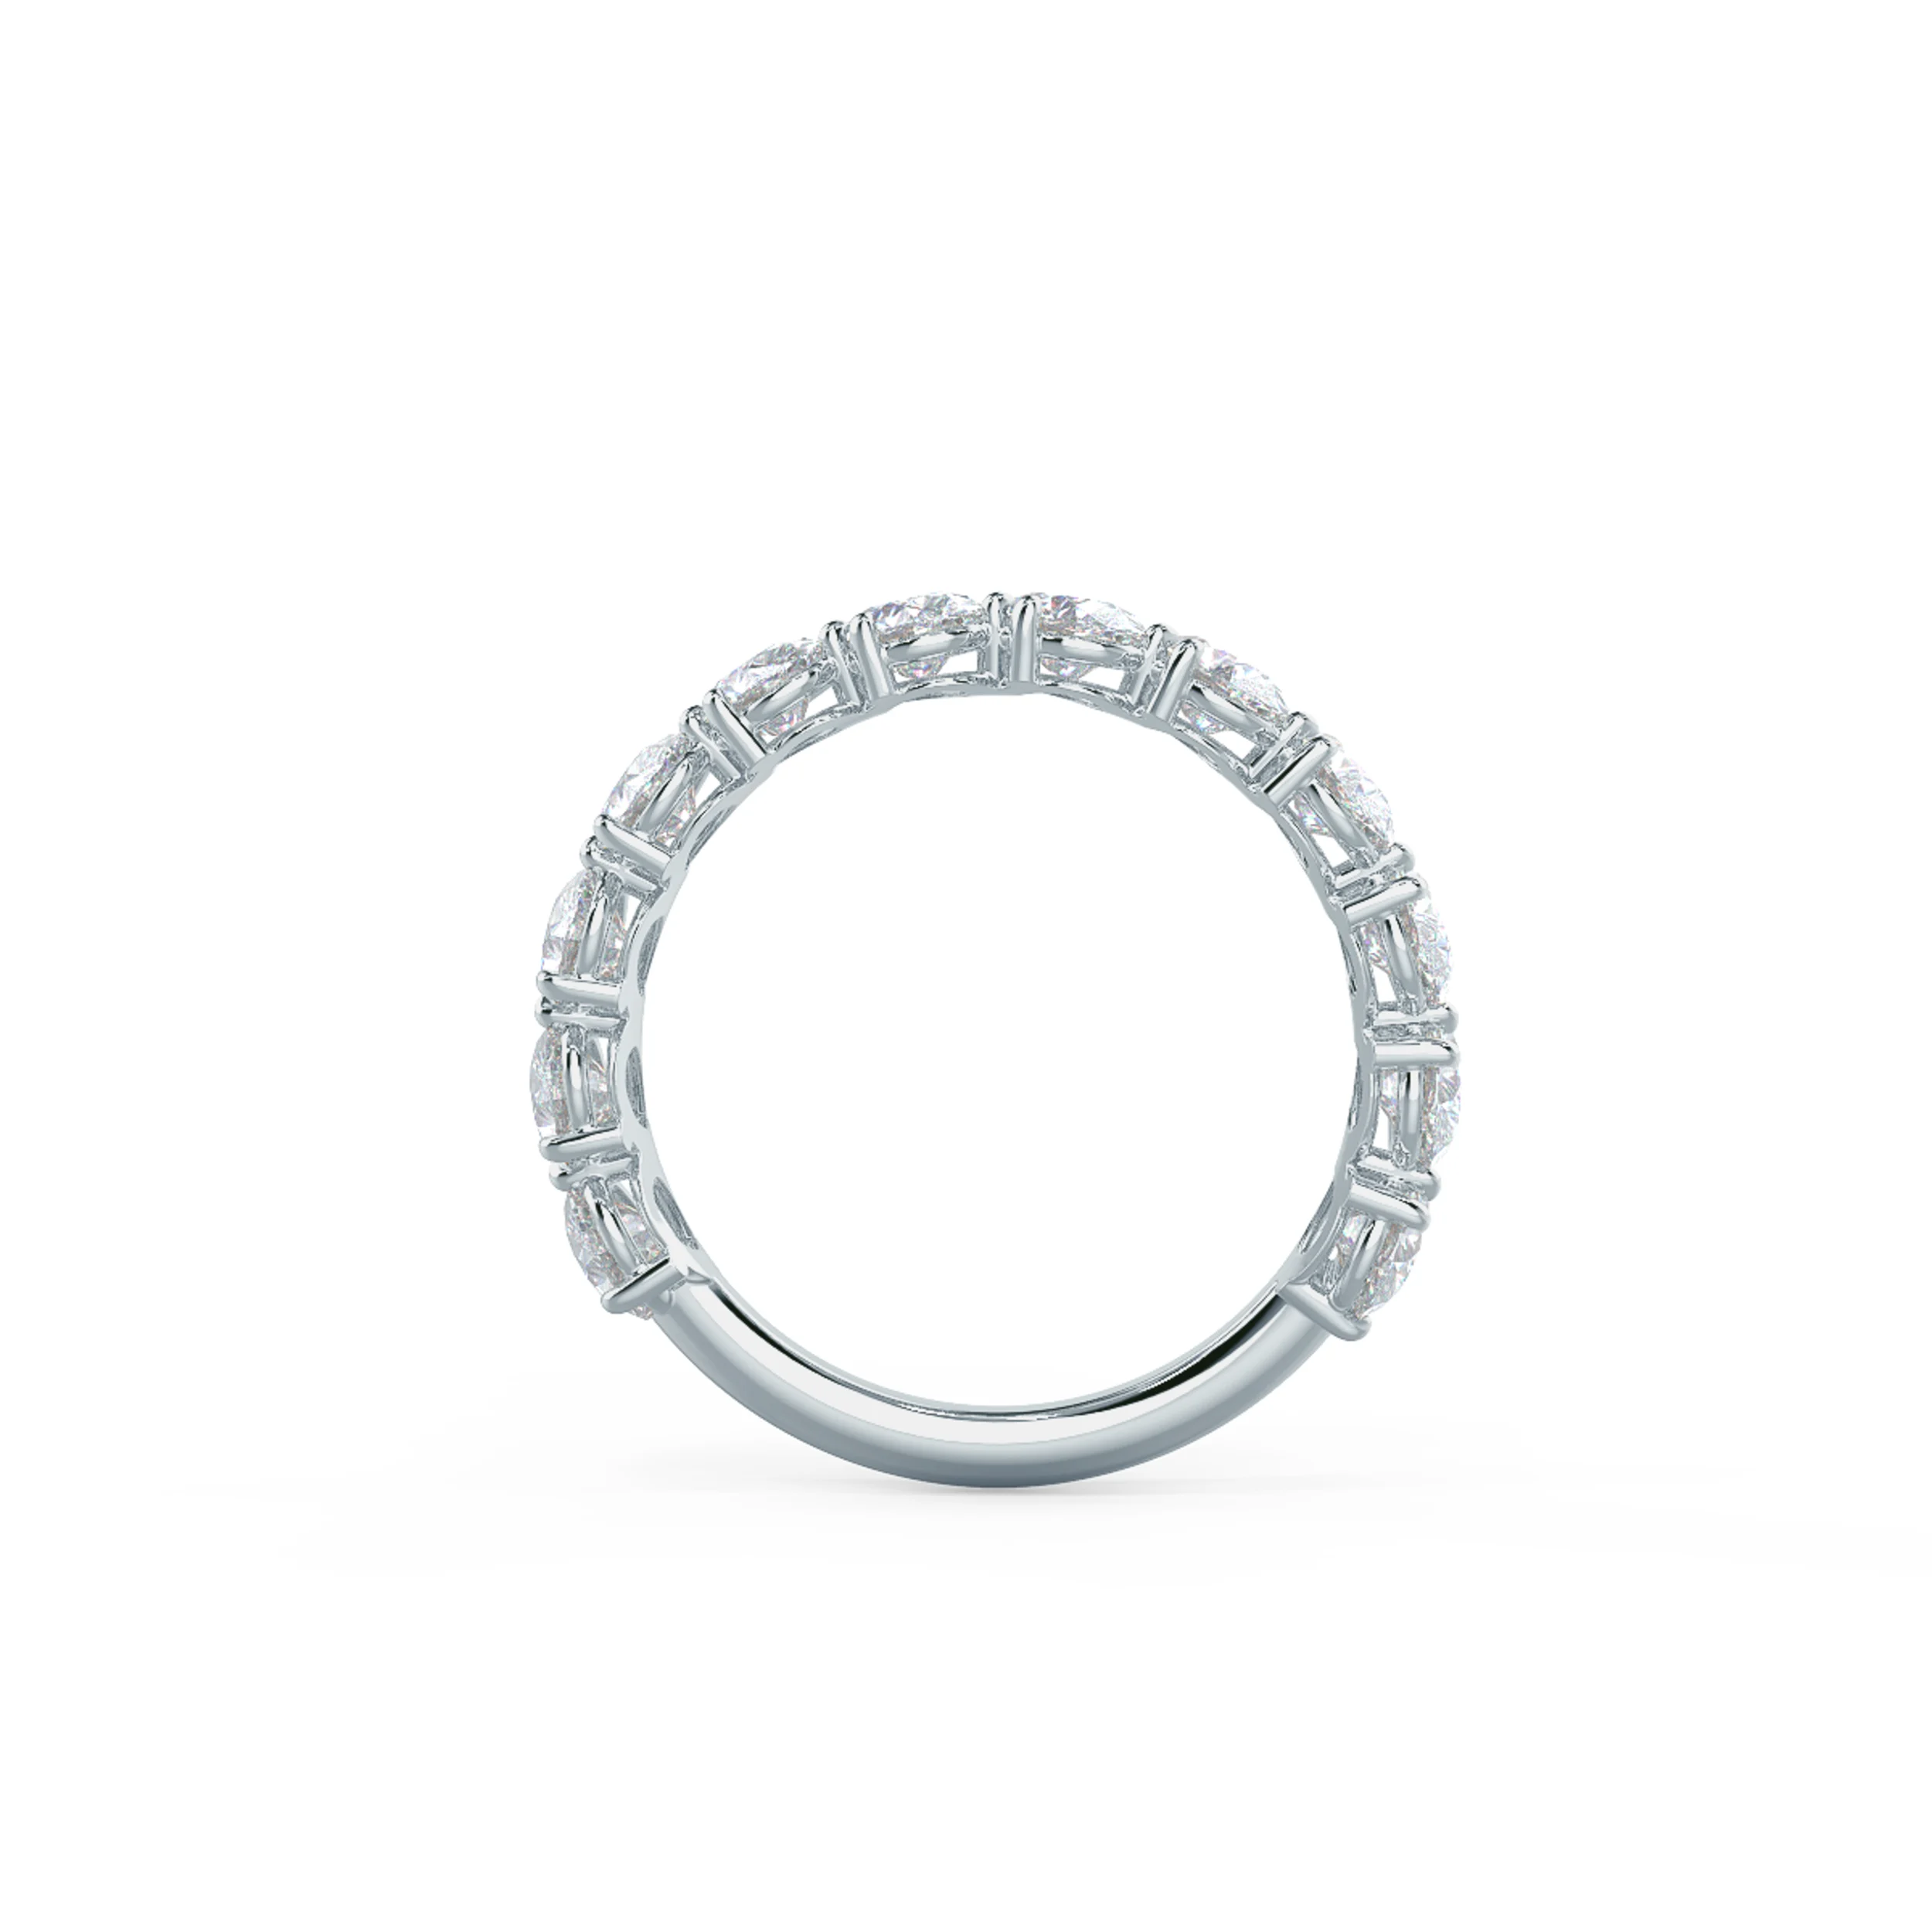 18kt White Gold Pear Angled Three Quarter Band featuring 4.0 Carat Lab Diamonds (Profile View)